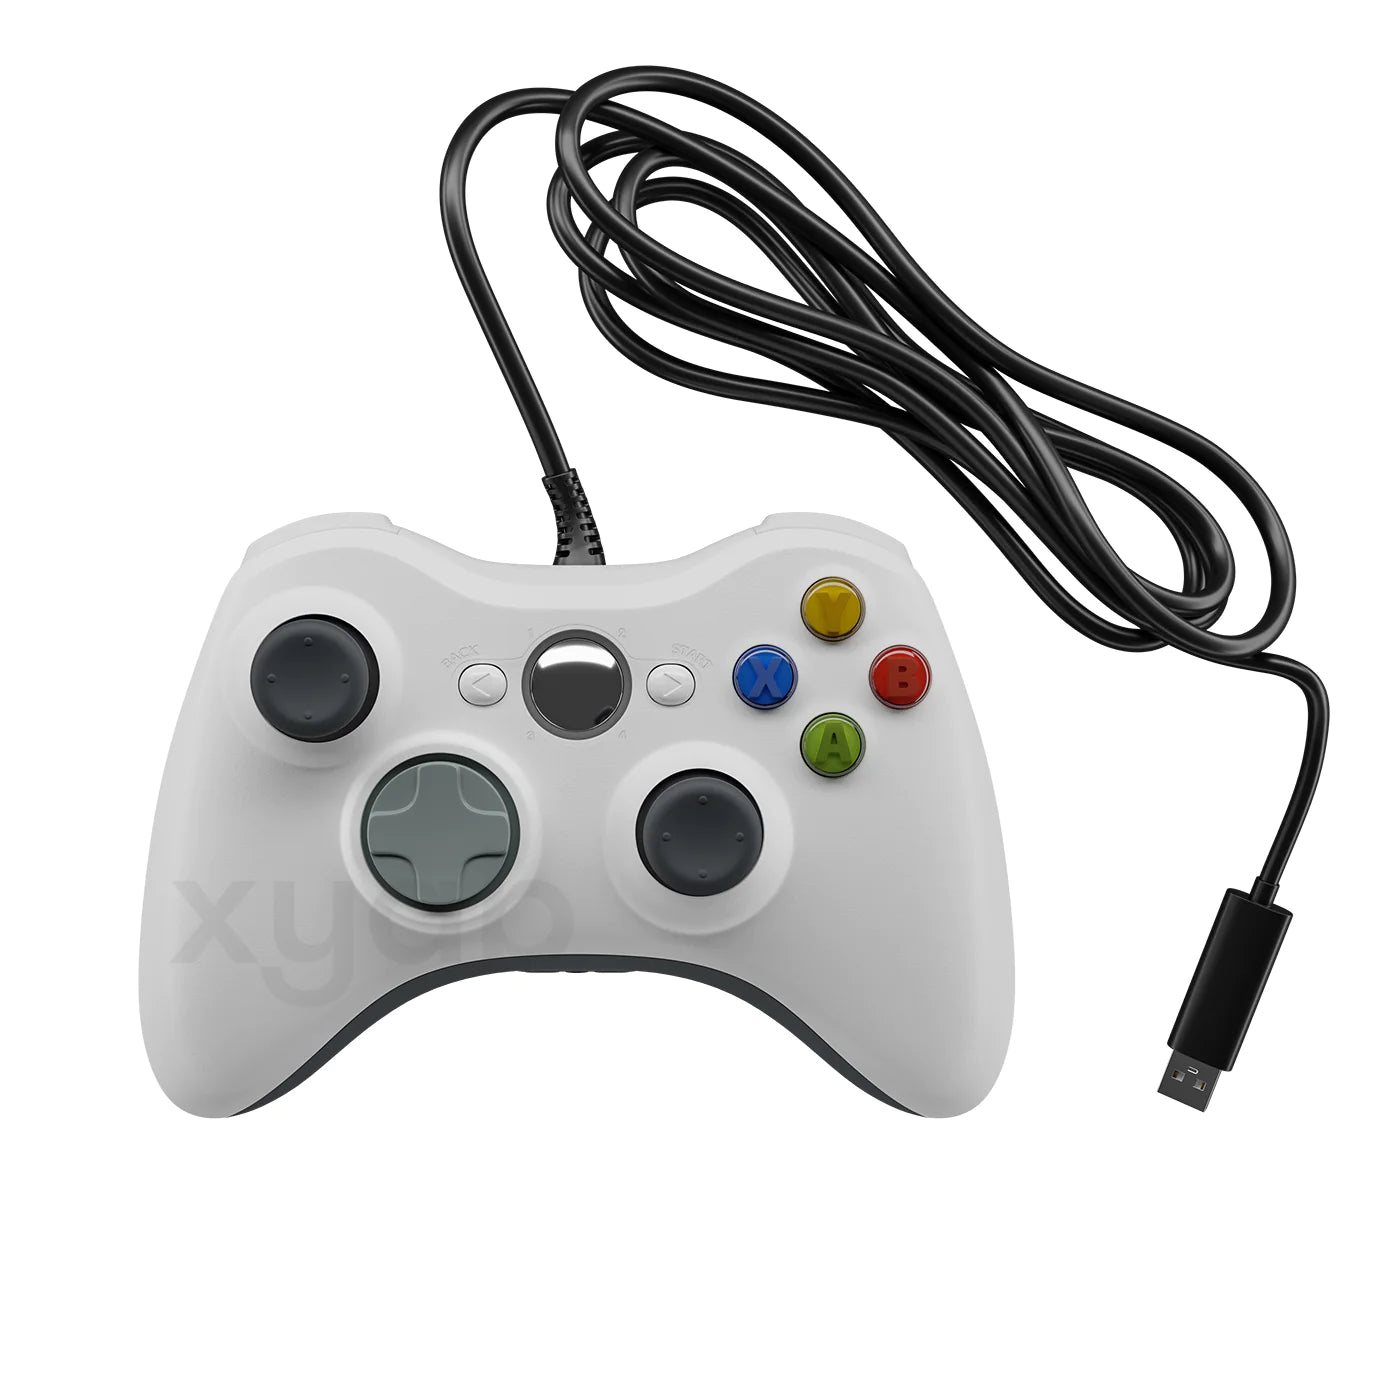 XYAB Wired Xbox 360 Controller - White